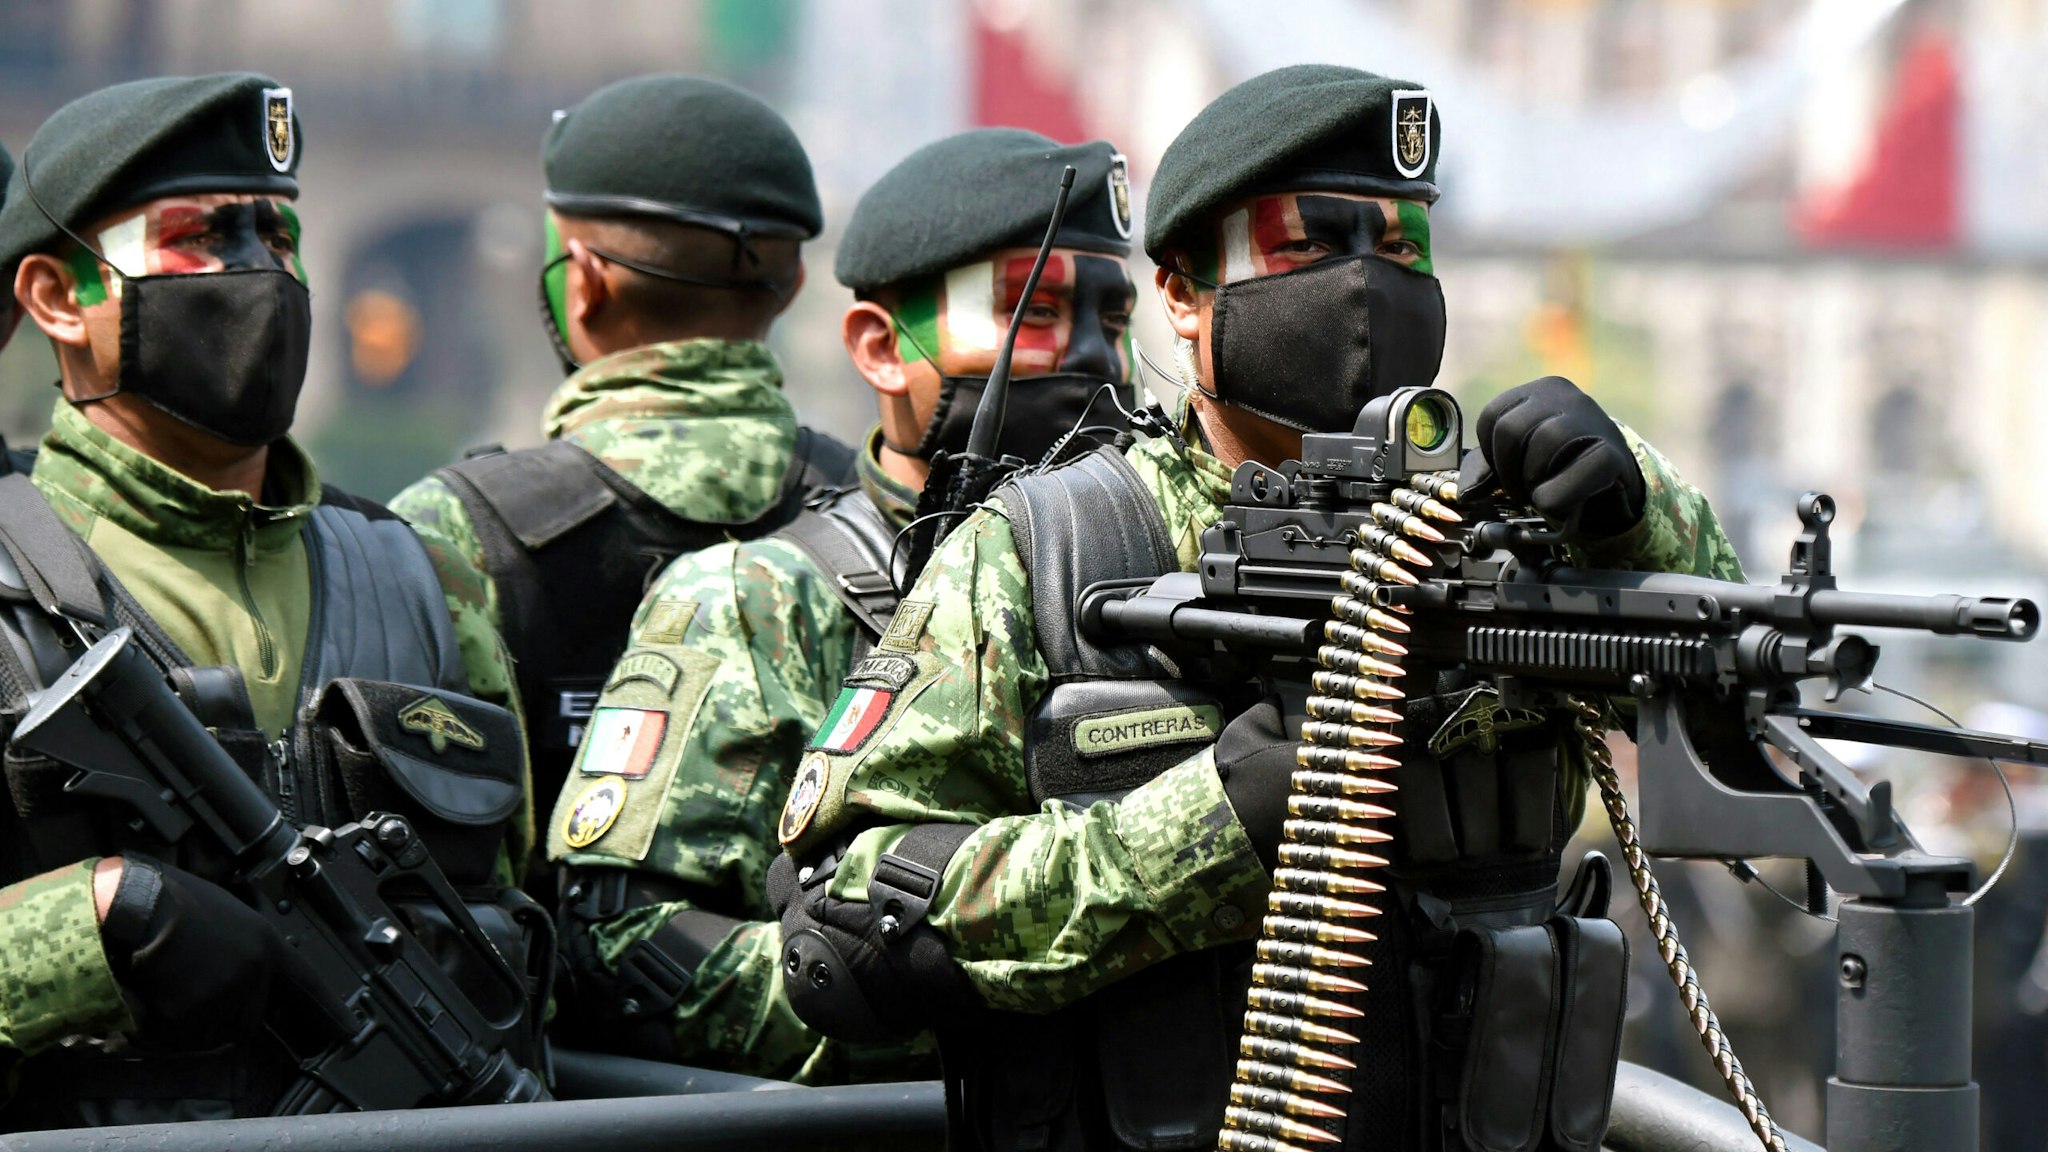 Soldiers of the Mexican Army take part in the military parade for the 211th anniversary of the Independence Day at the Zocalo Square in Mexico City on September 16, 2021.